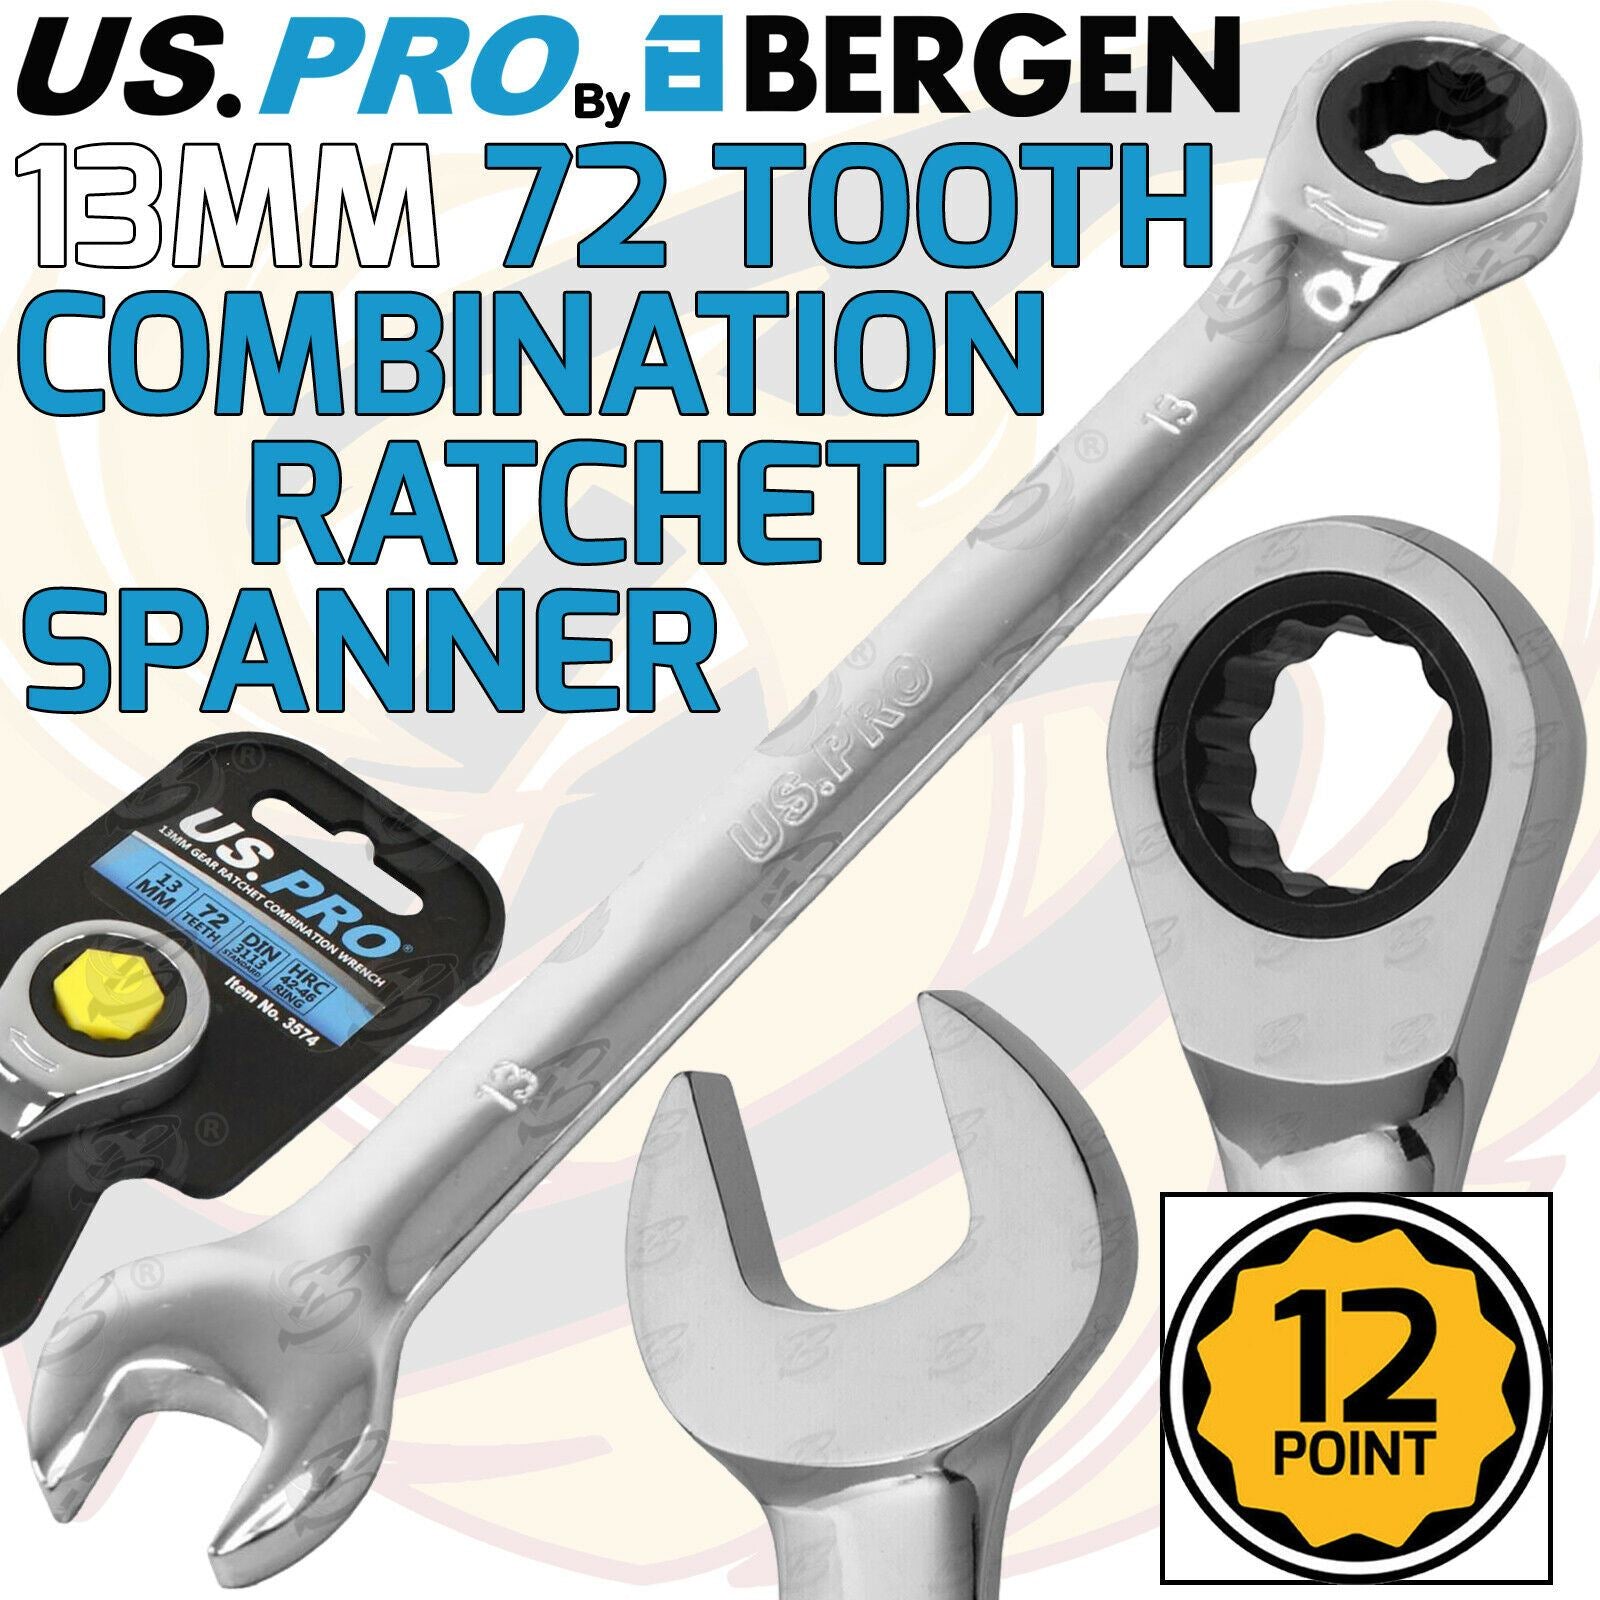 US PRO 13MM 72 TOOTH RATCHET SPANNER